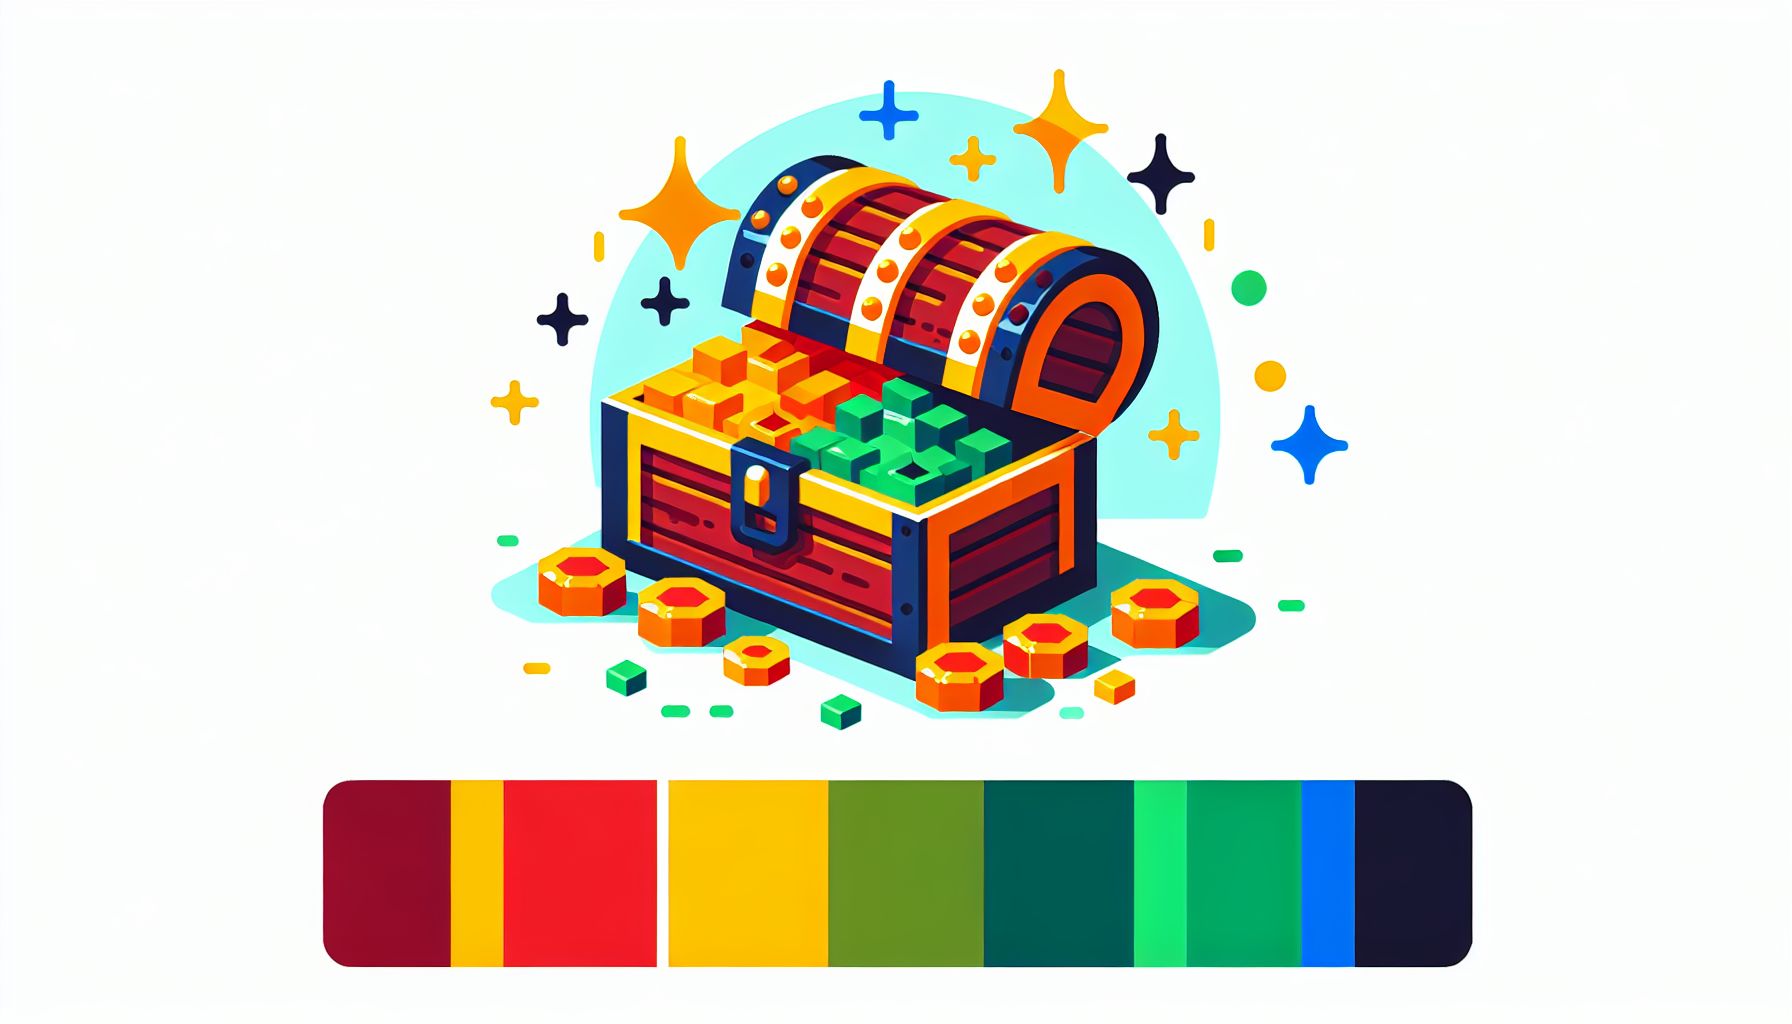 Treasure Chest in flat illustration style and white background, red #f47574, green #88c7a8, yellow #fcc44b, and blue #645bc8 colors.